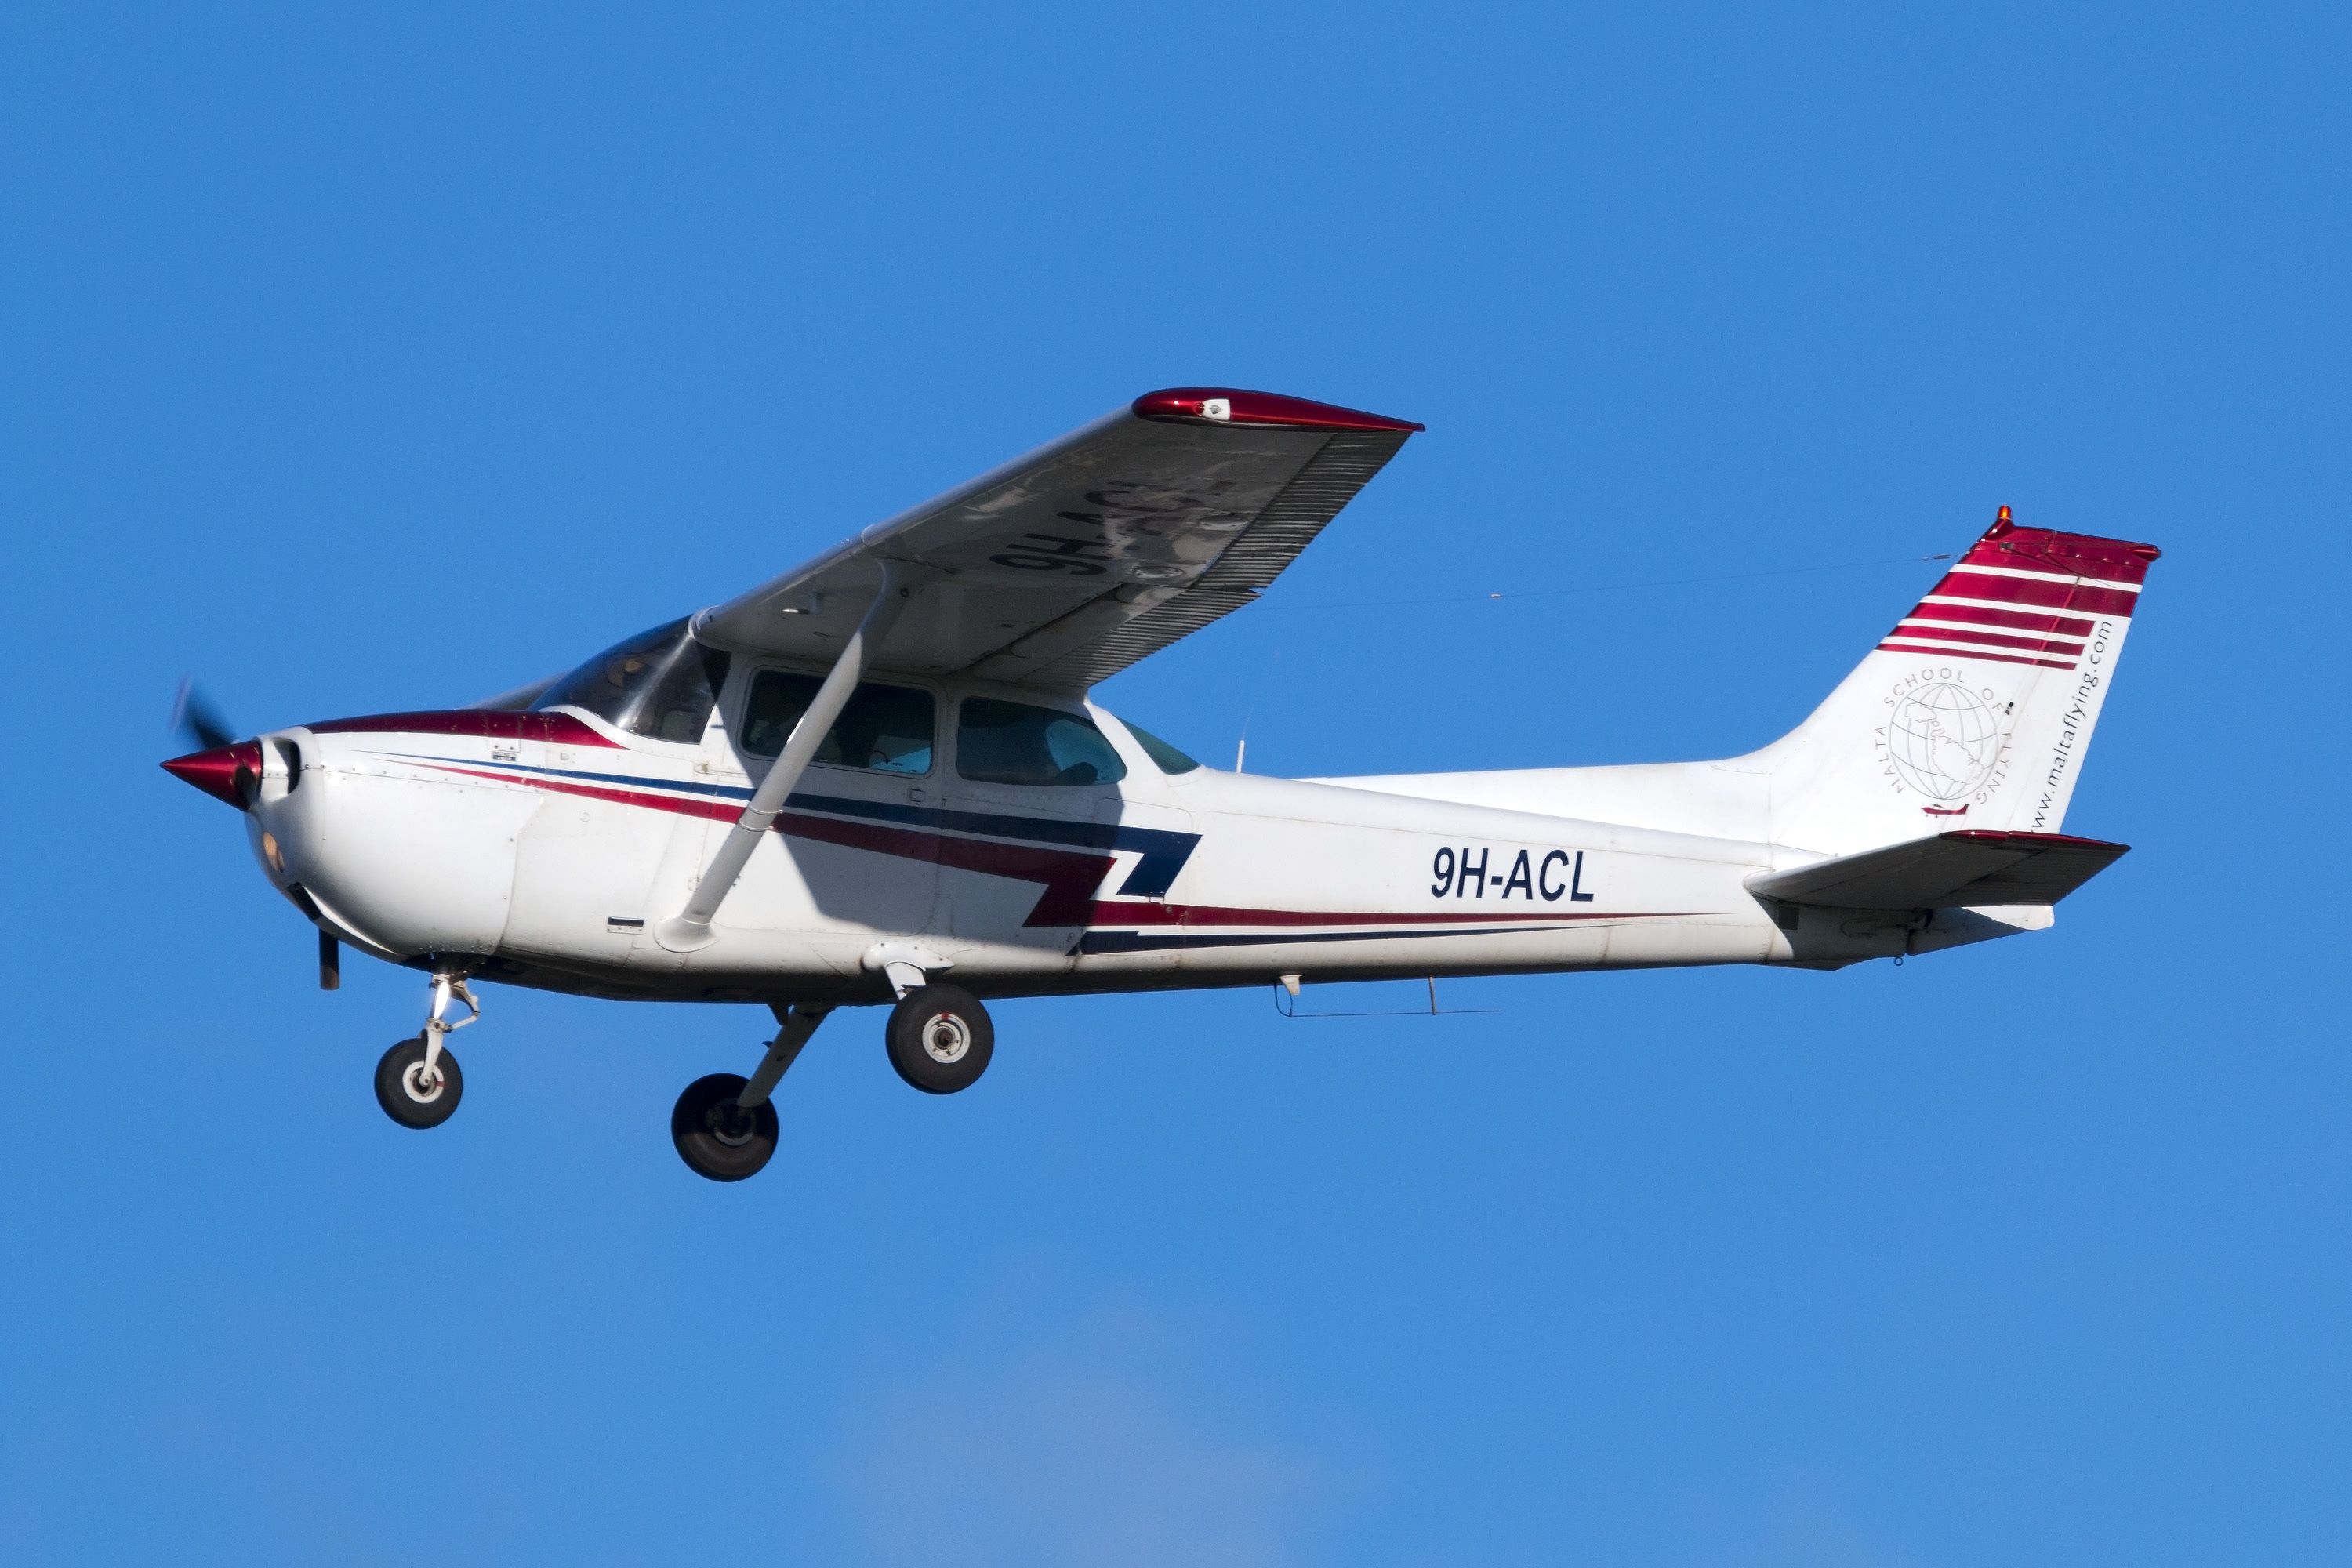 A Cessna 172 flying in the sky.